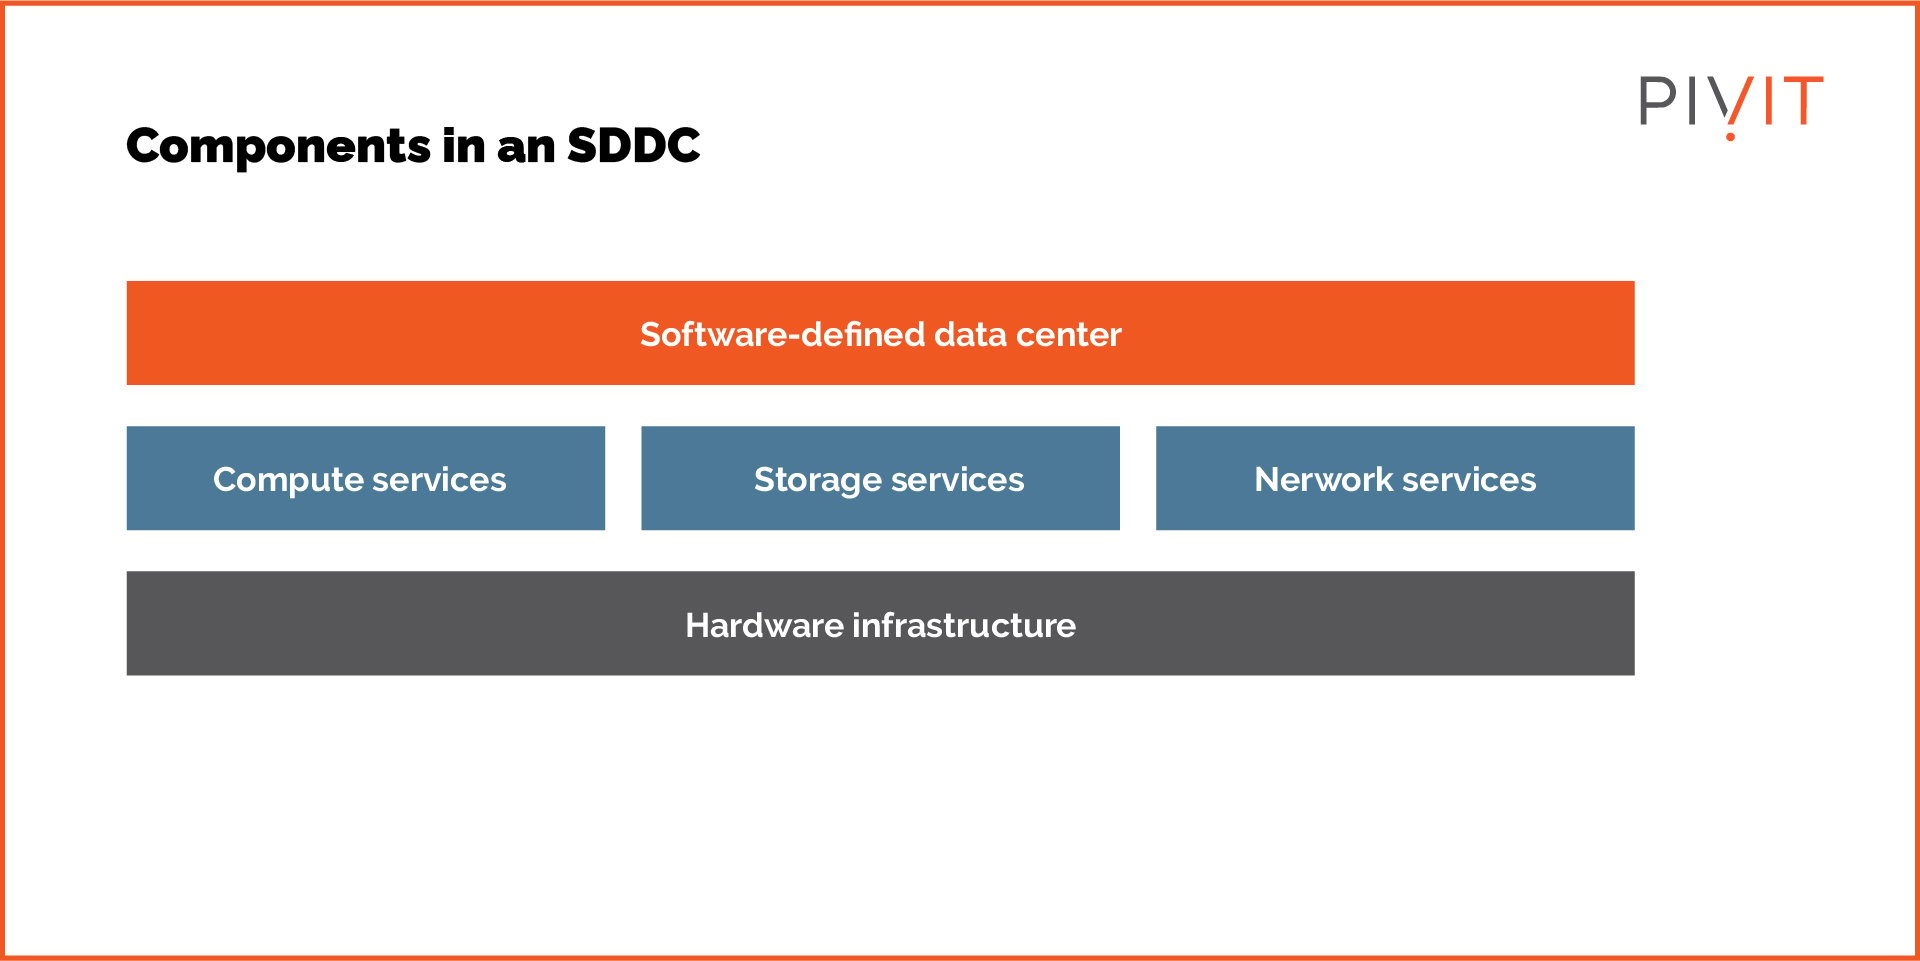 Components in an SDDC